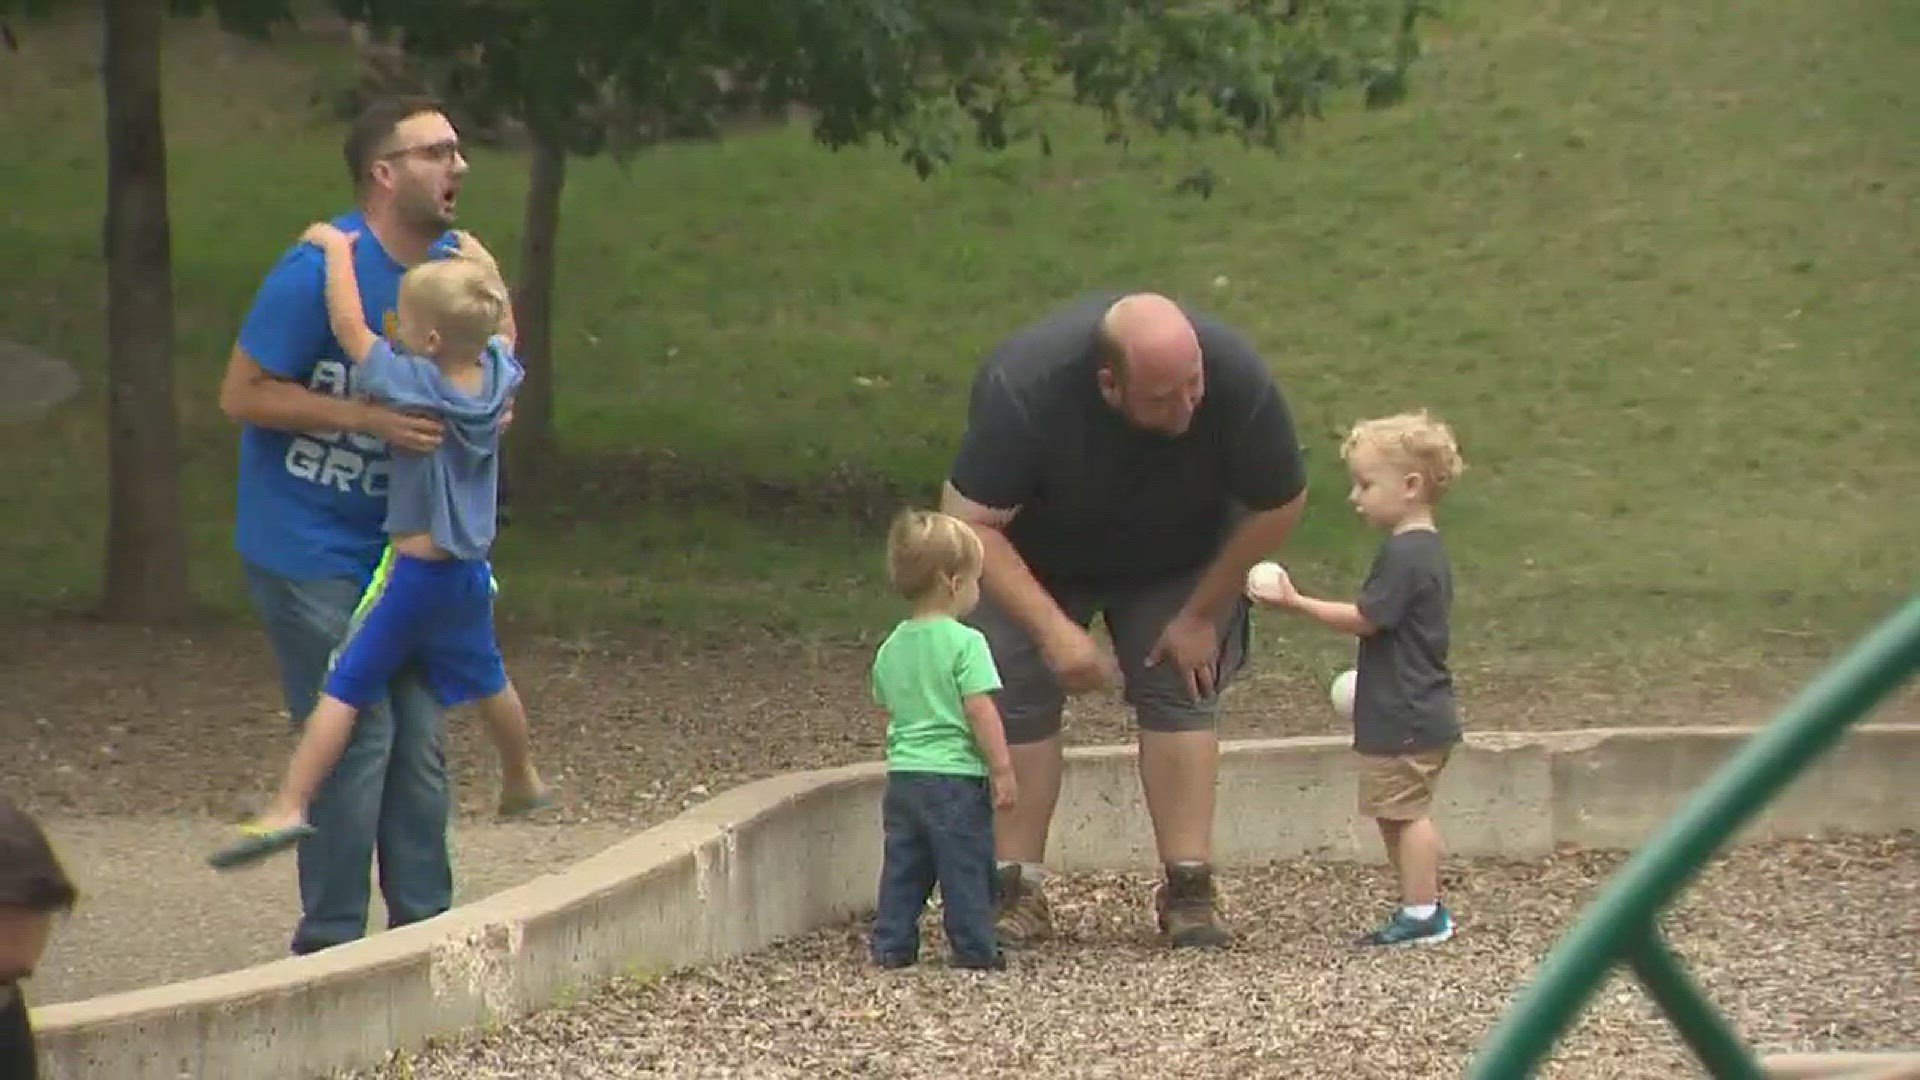 Daycare for young kids can get a bit pricey, so many families choose to have one parent stay home. For more and more families that parent is the dad. Meet the Austin Dads Group.